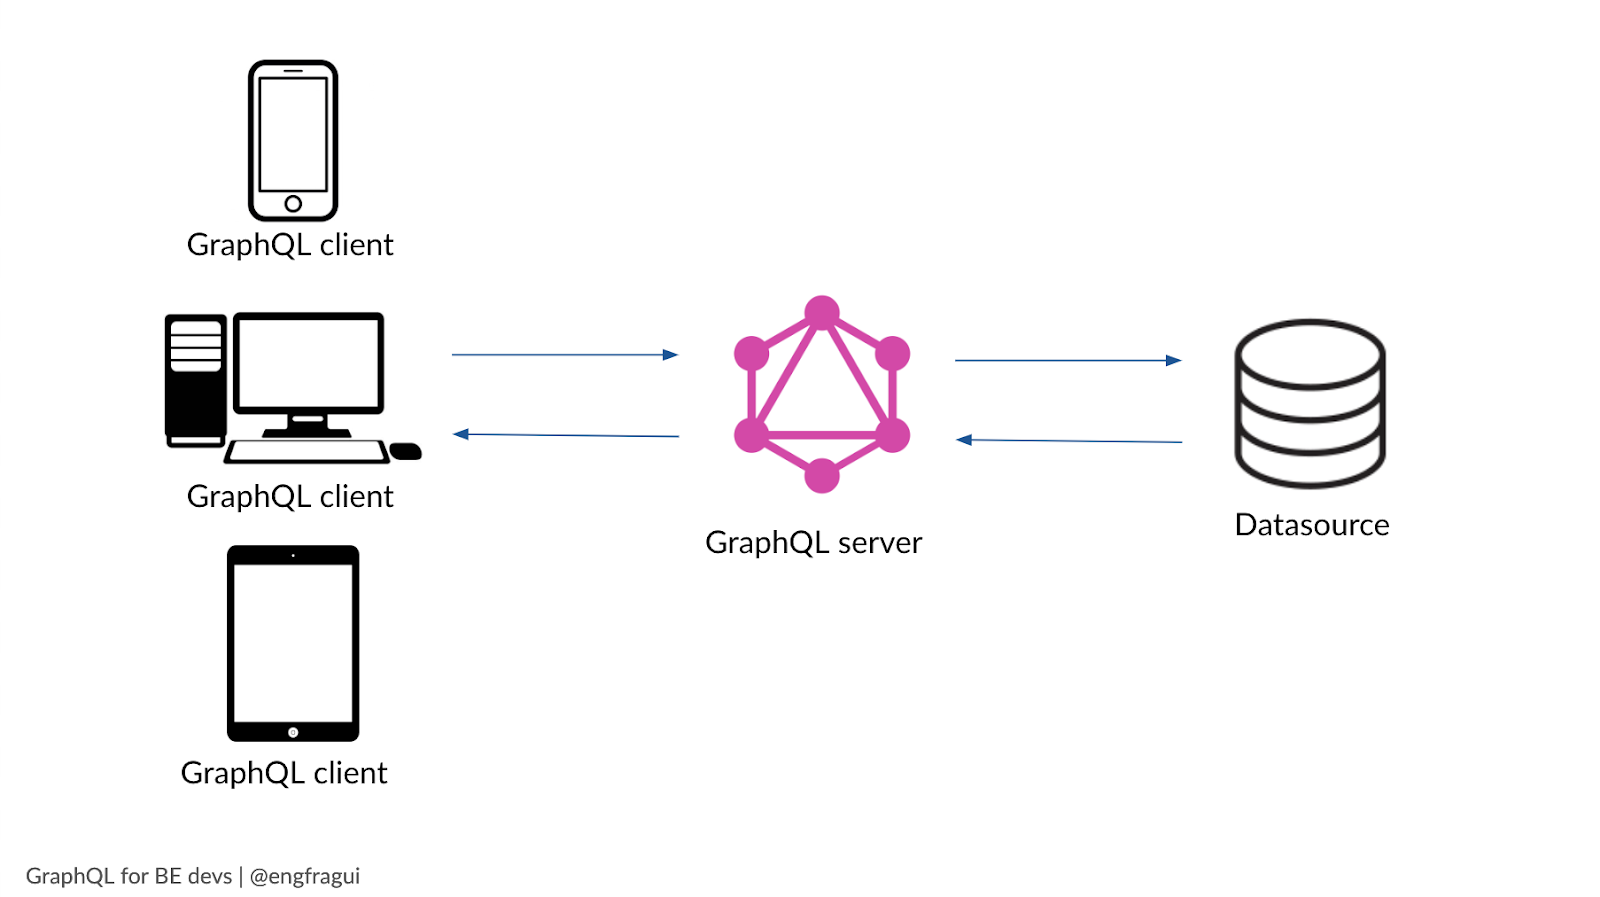 GraphQL stands in-between the client and backend services